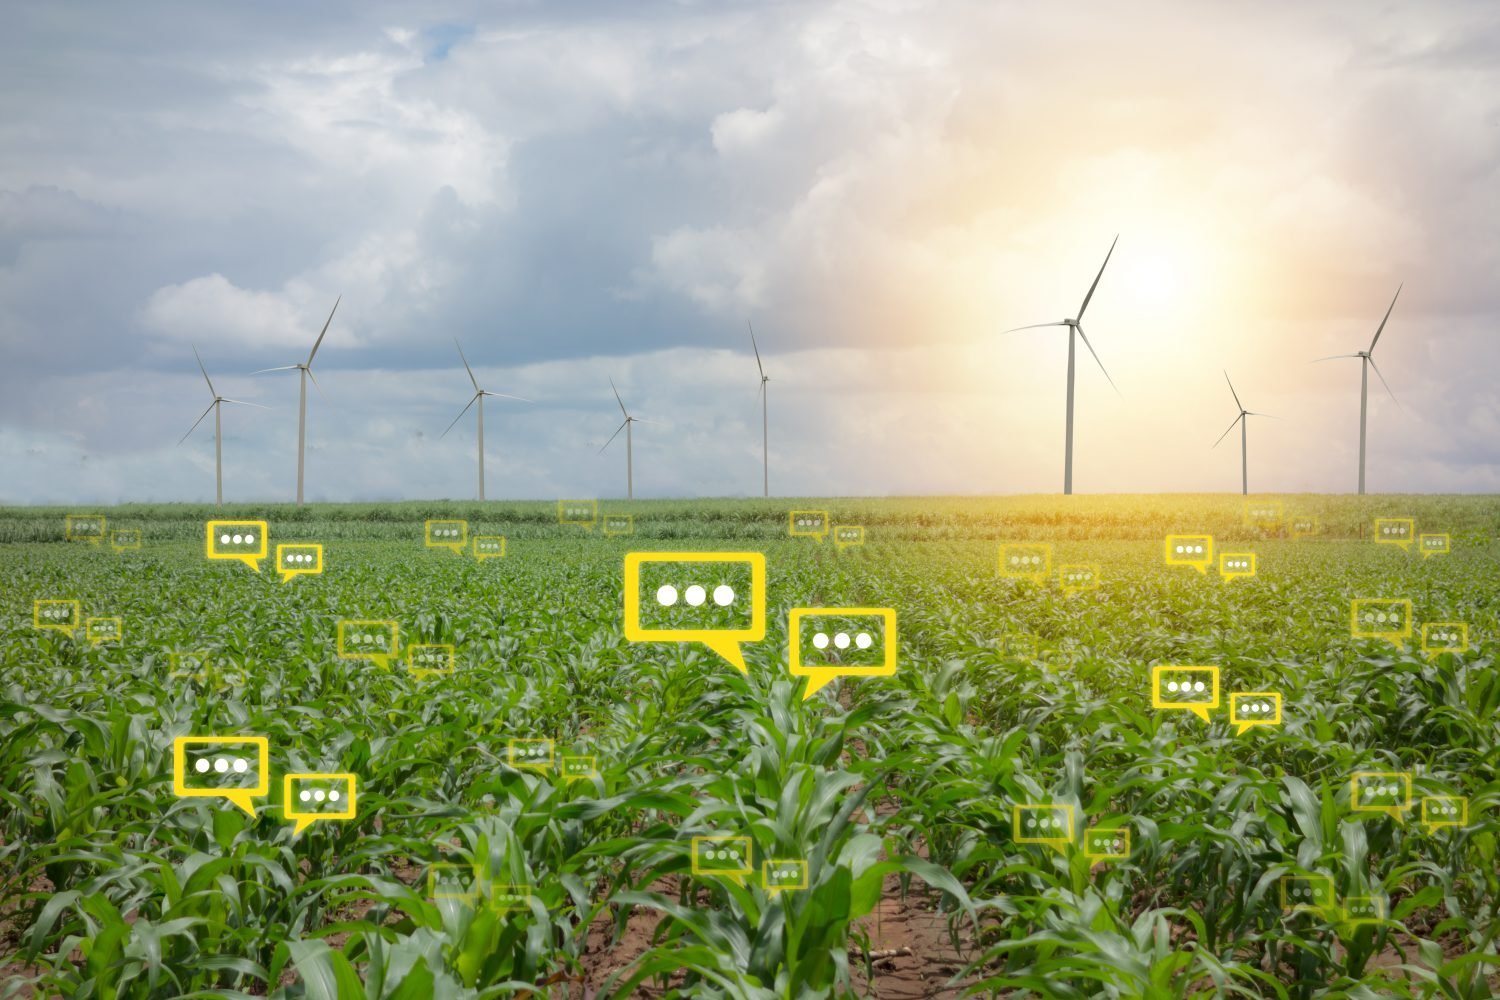 Crop farm with digital thought boxes implying big data information